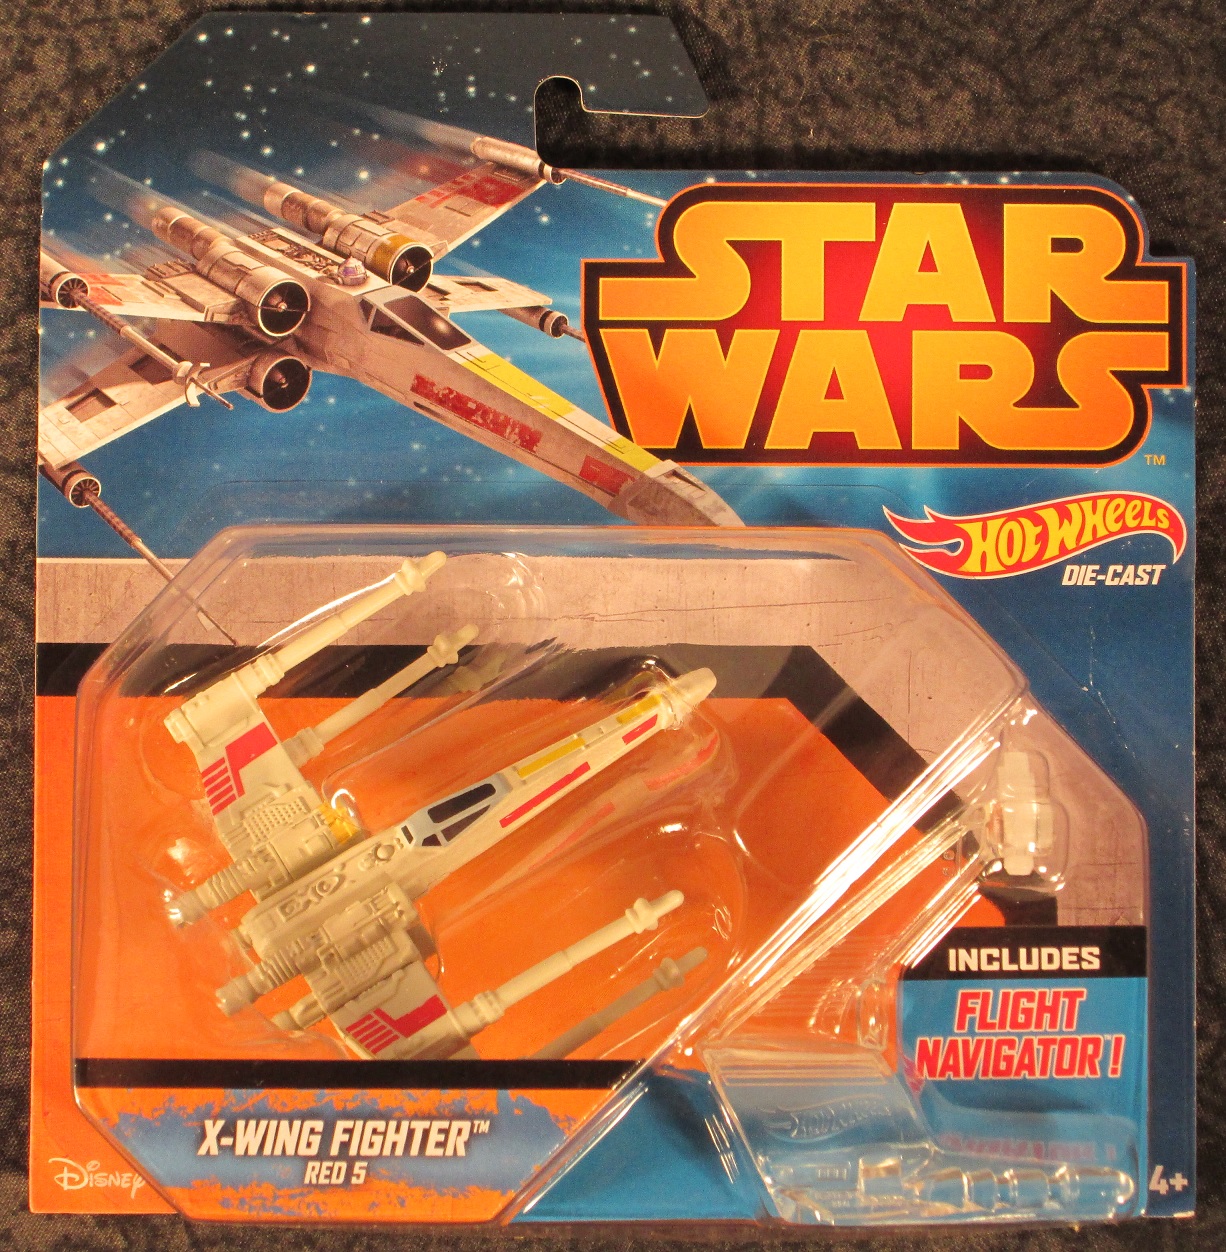 Hot Wheels Star Wars Starship X-Wing Fighter Red 5 Collectible Scale Collection 